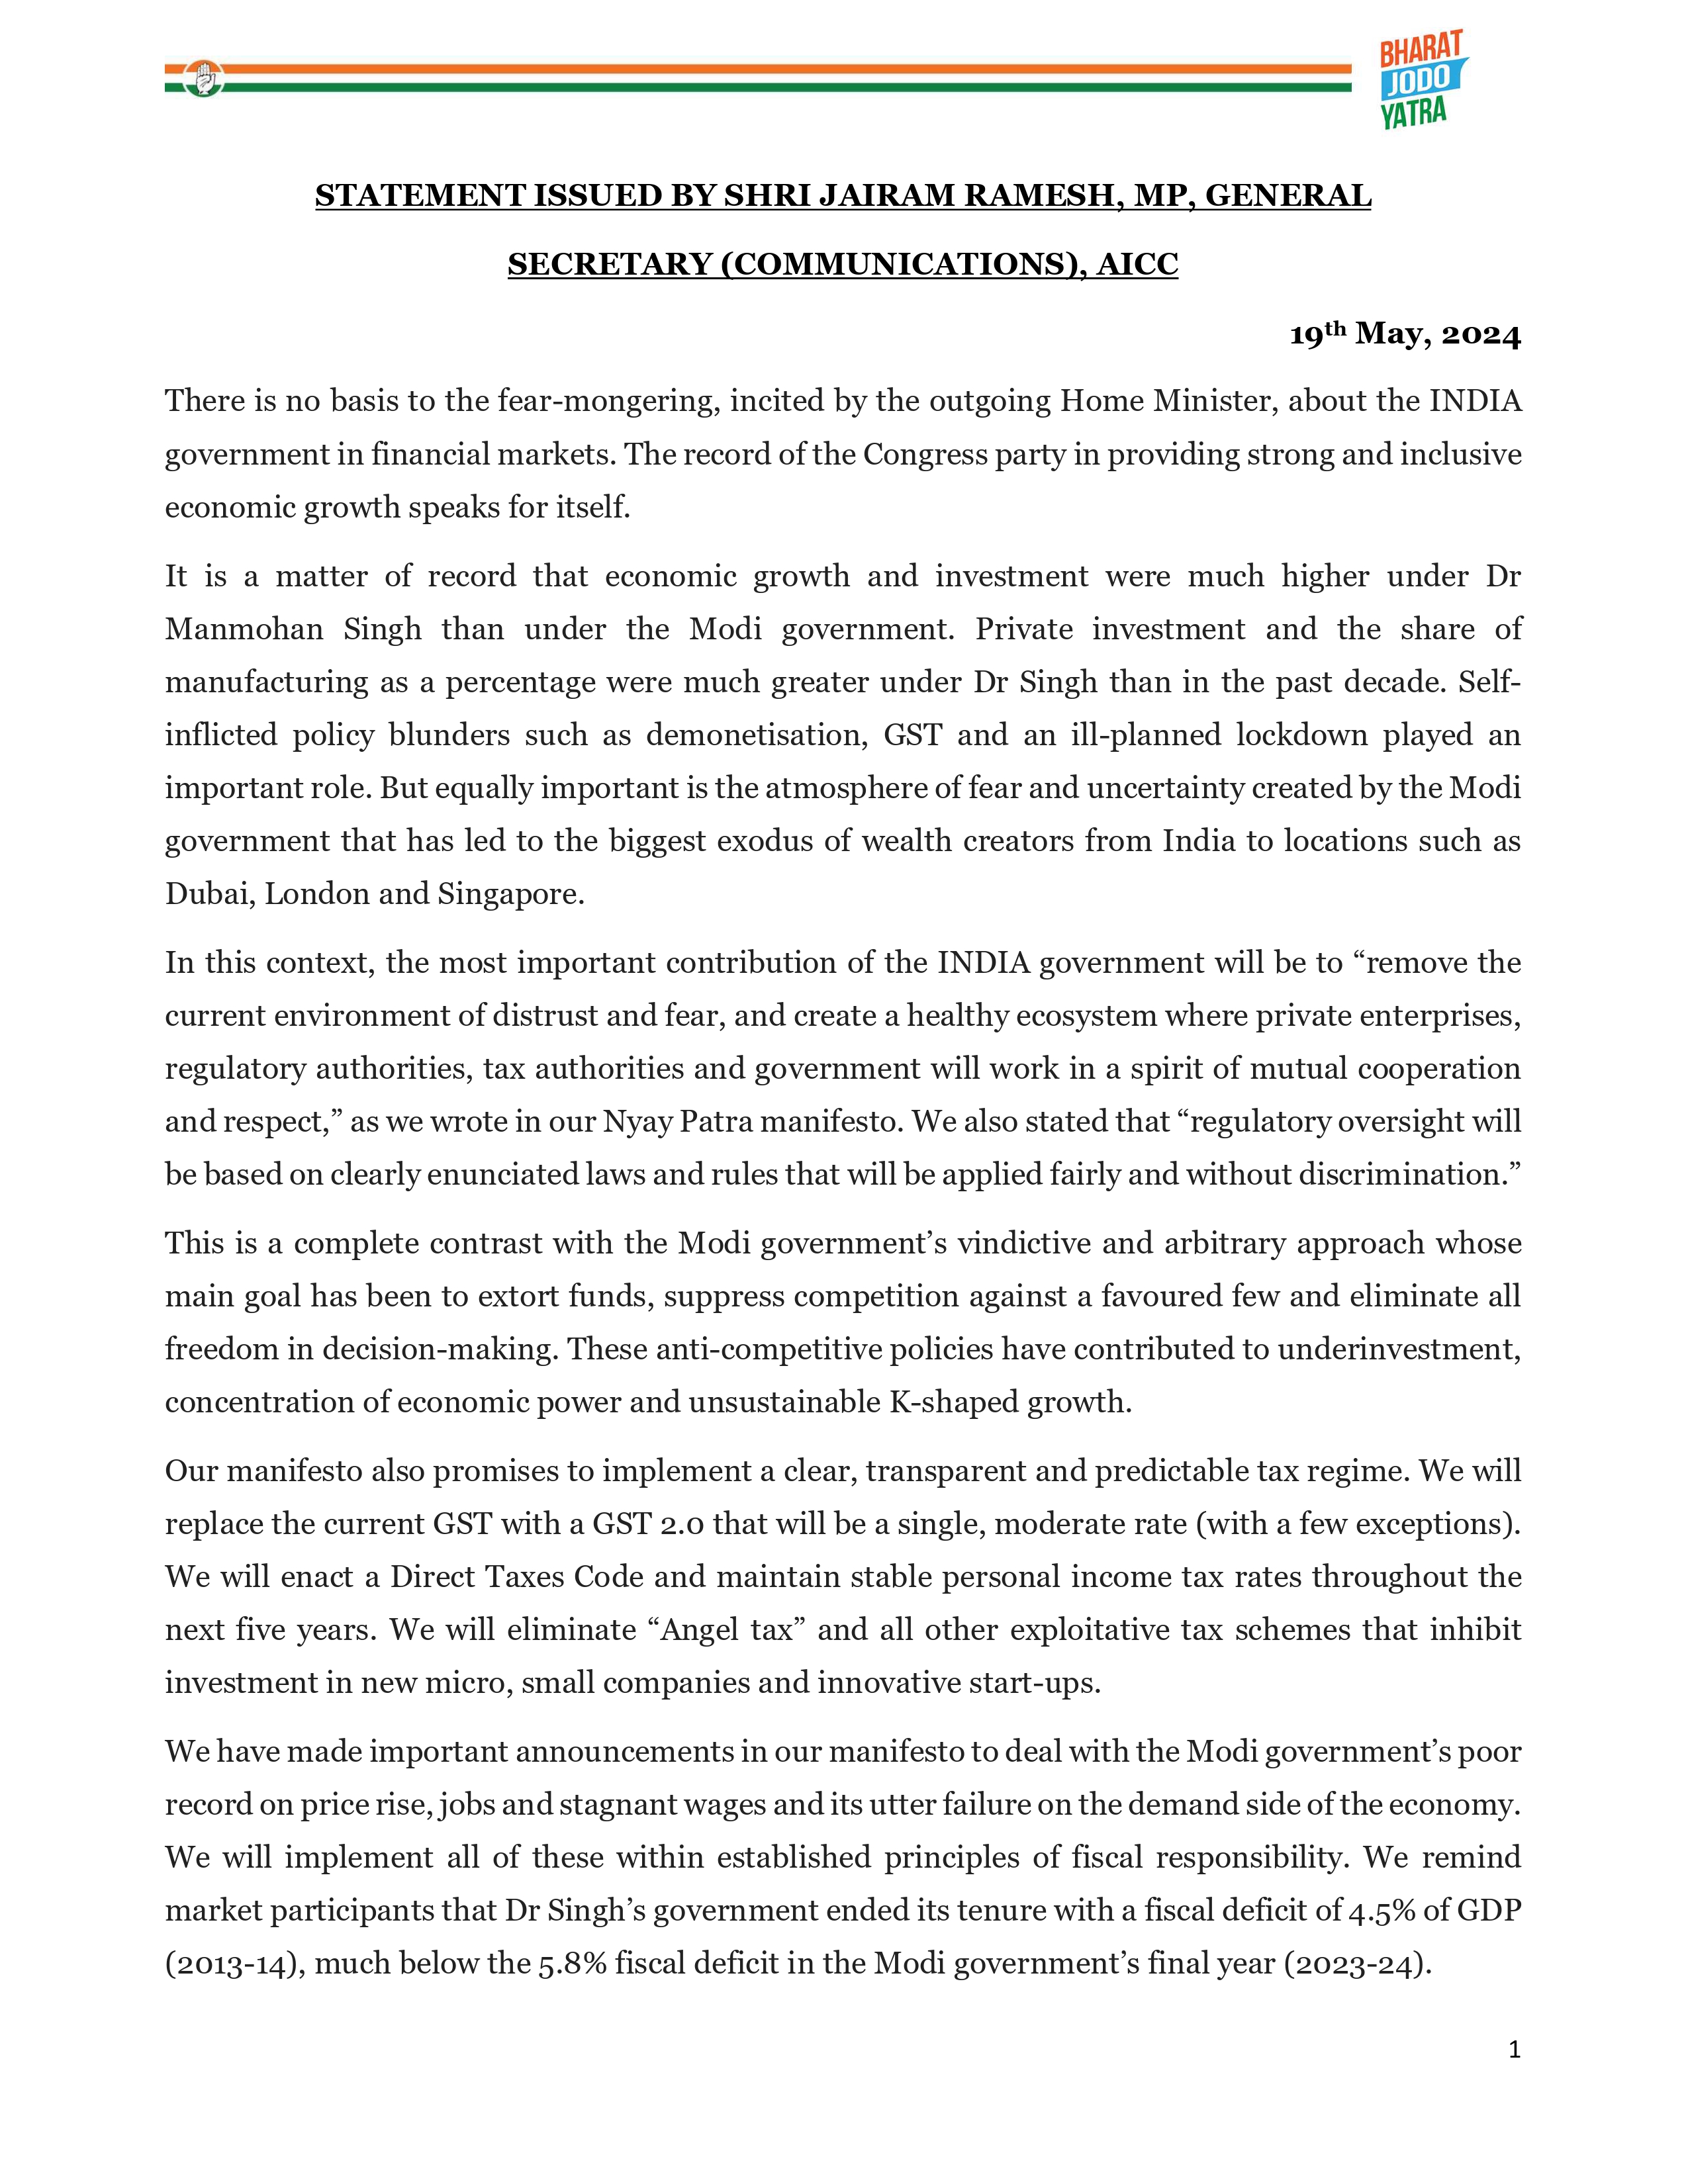 Our statement on the increasing market volatility of the last few weeks. There is no need for the fear-mongering that the Home Minister is inciting. The INDIA Coalition is coming to power, and it shall herald a new age of stable, predictable policymaking 